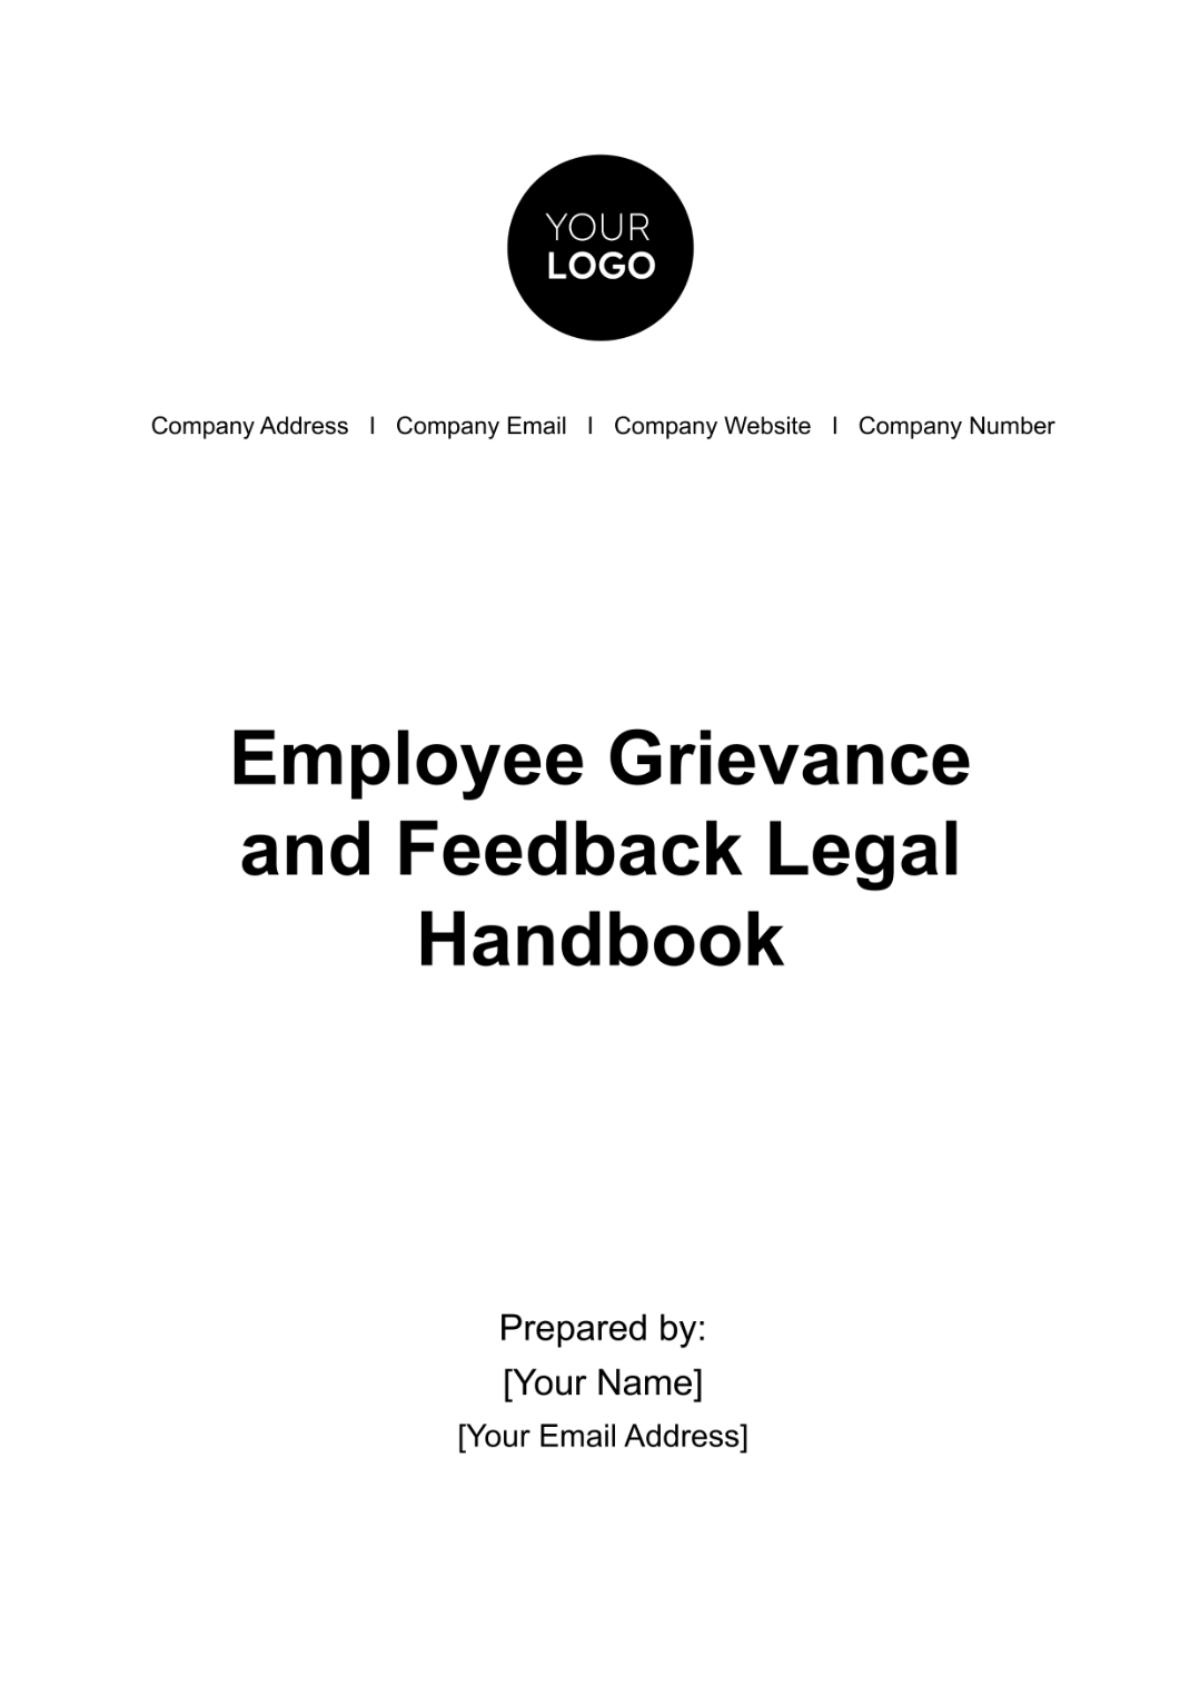 Free Employee Grievance and Feedback Legal Handbook HR Template